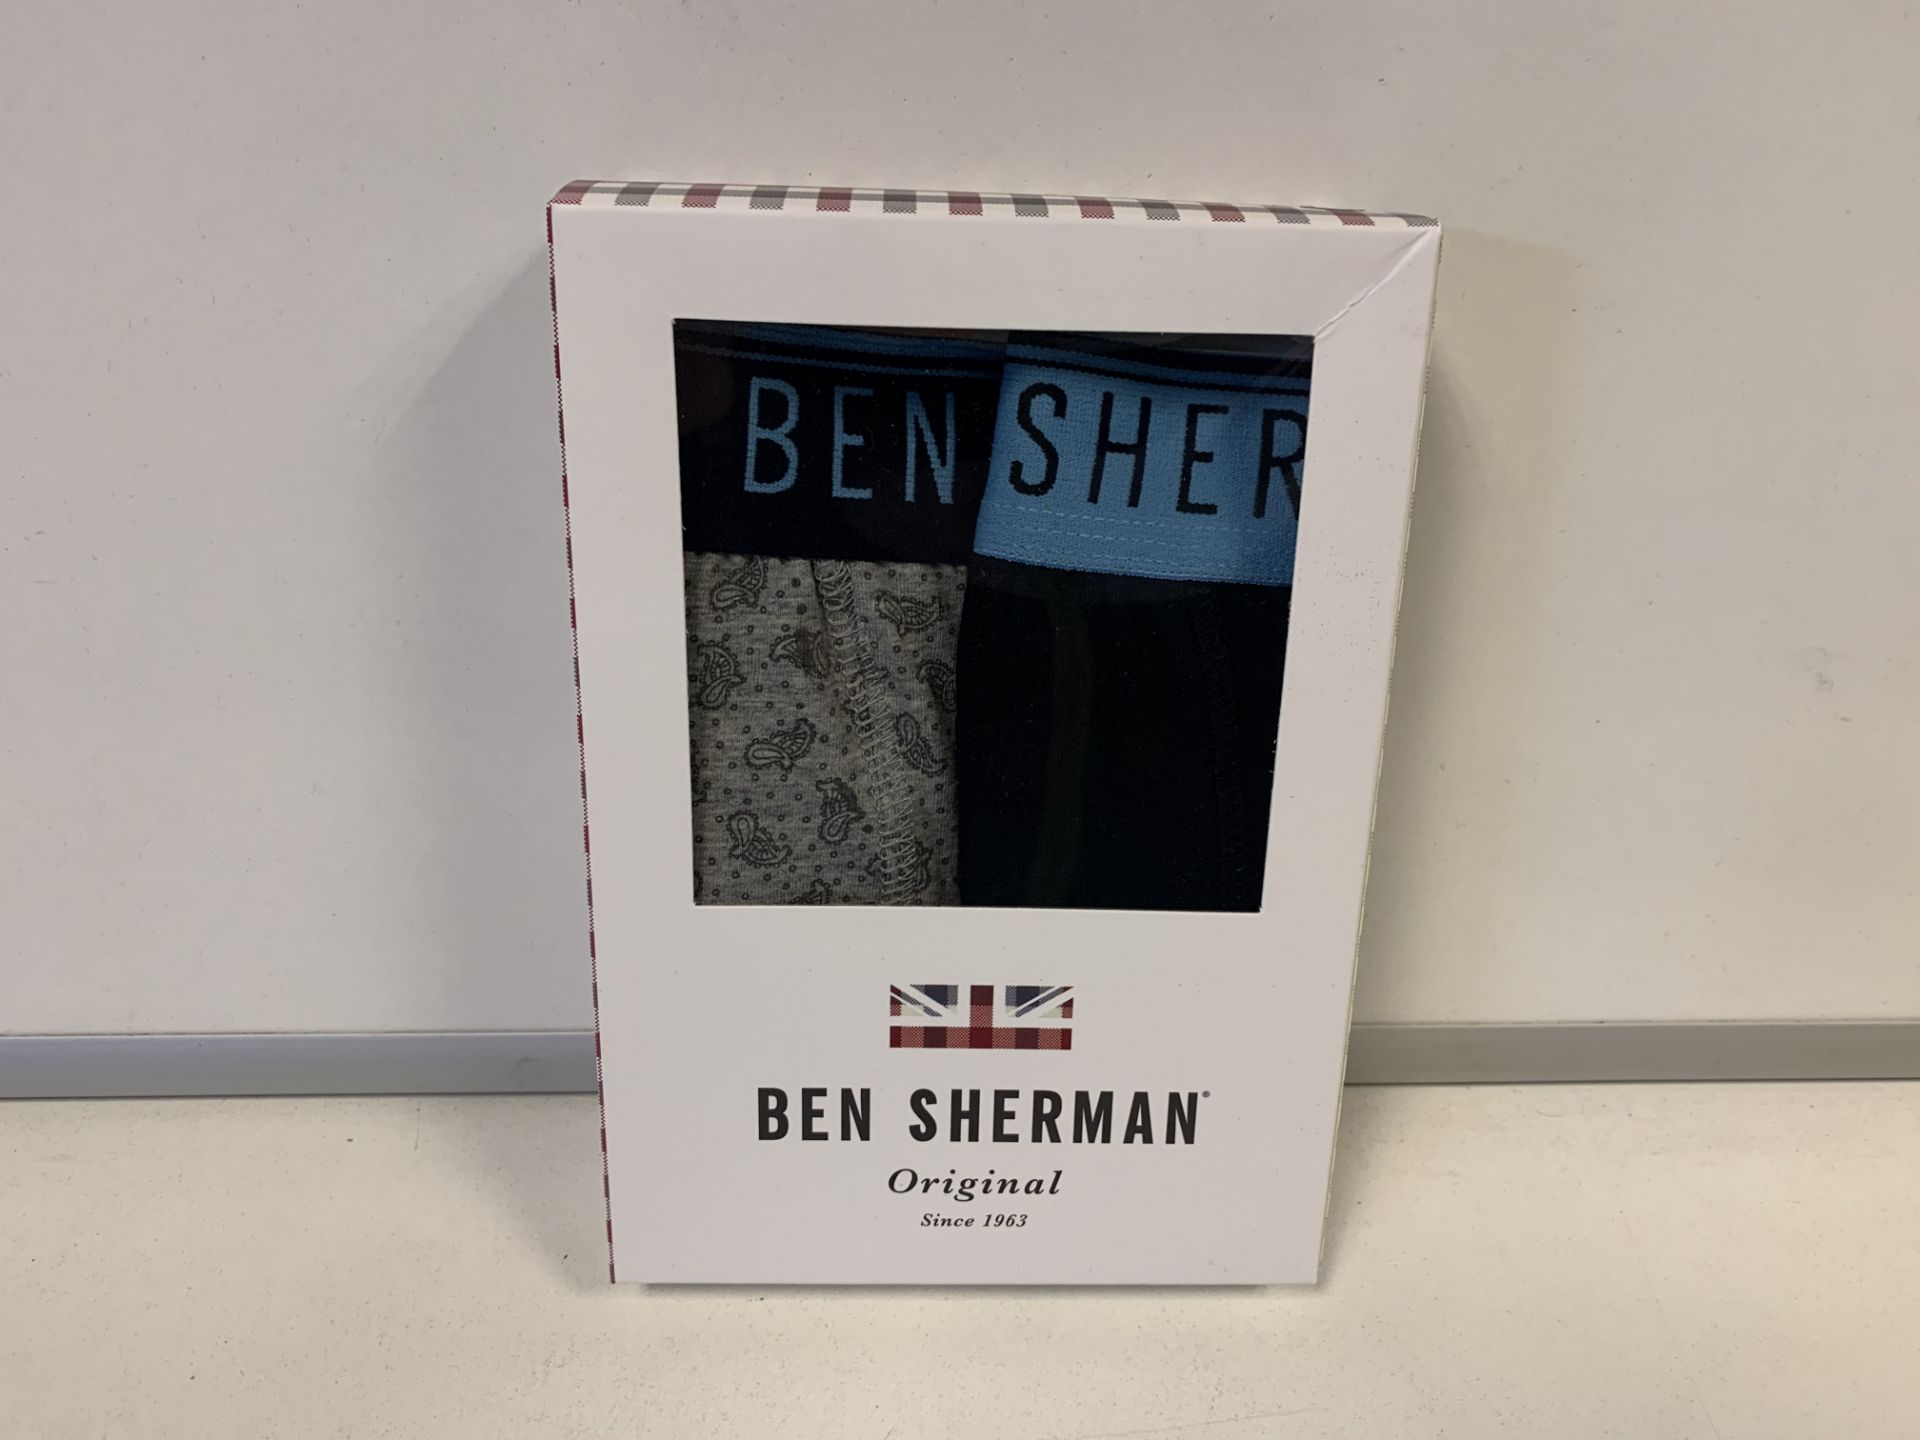 30 X BRAND NEW BEN SHERMAN 2 PACK OF MENS BOXERS SIZE SMALL